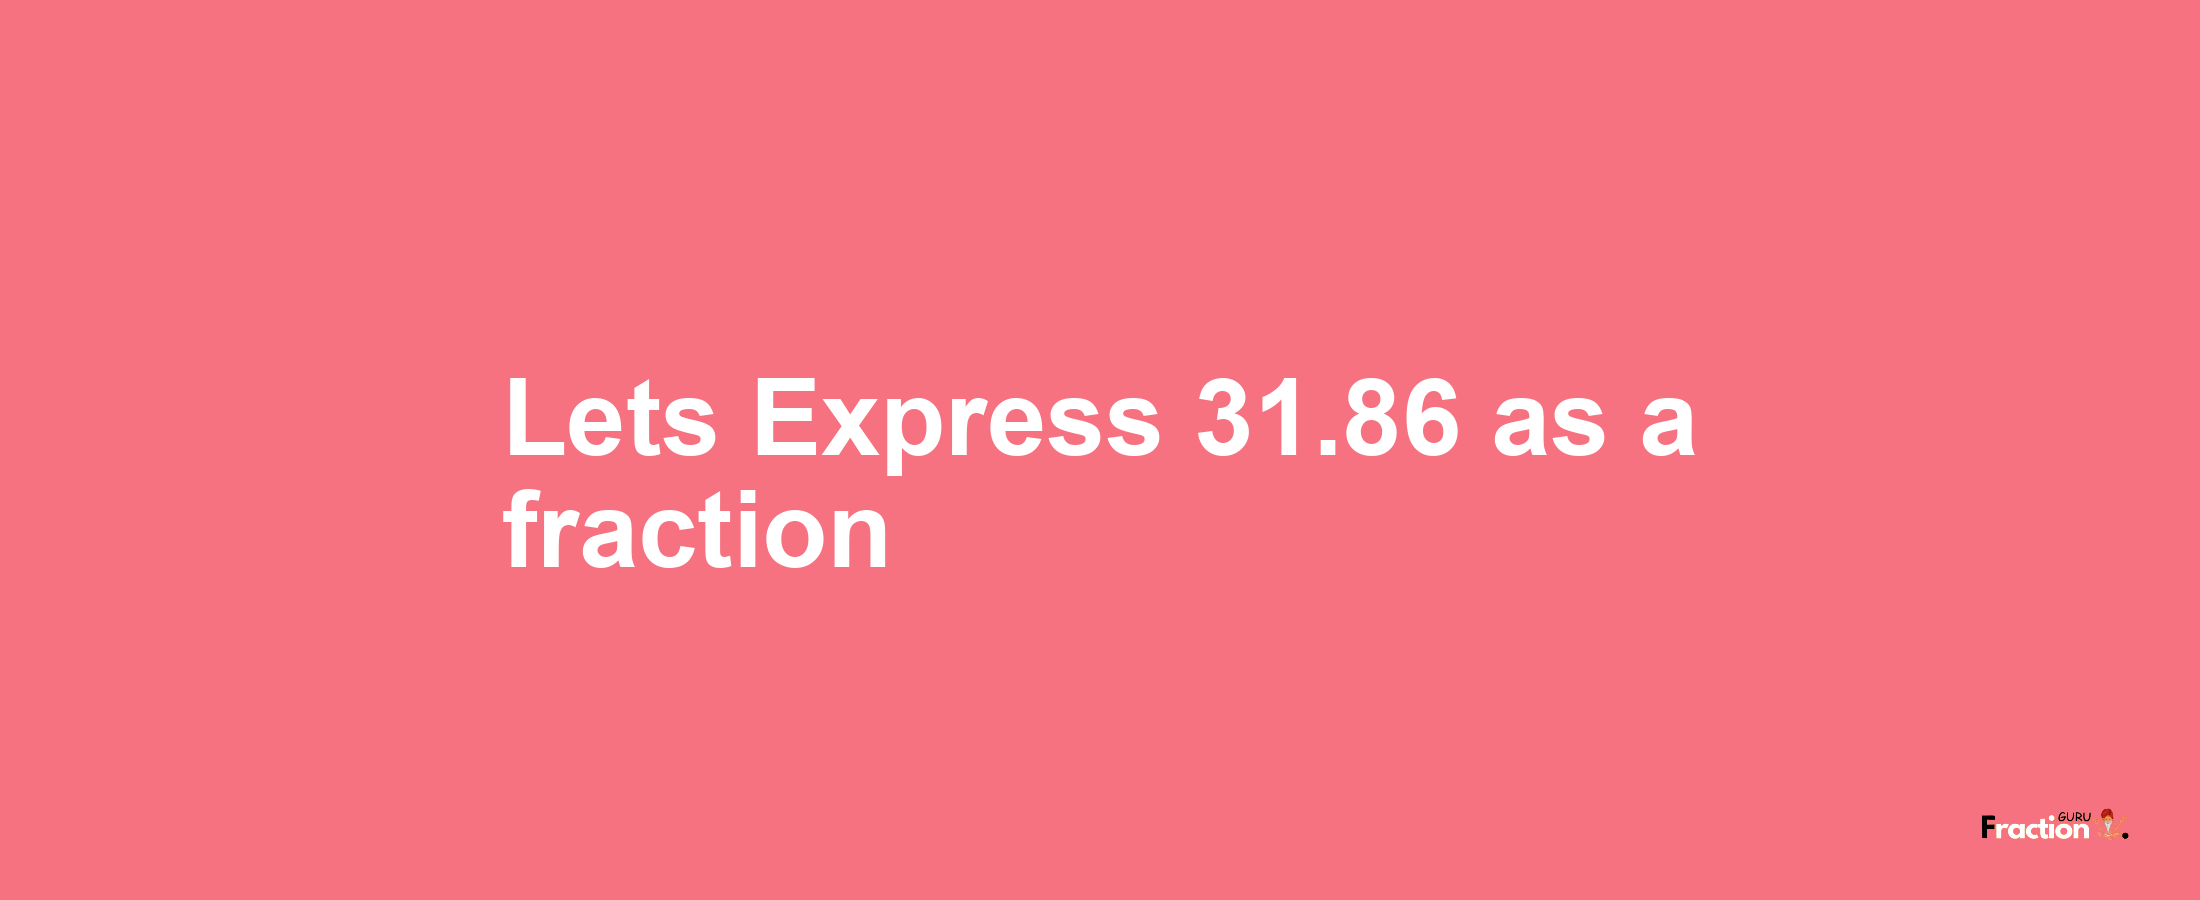 Lets Express 31.86 as afraction